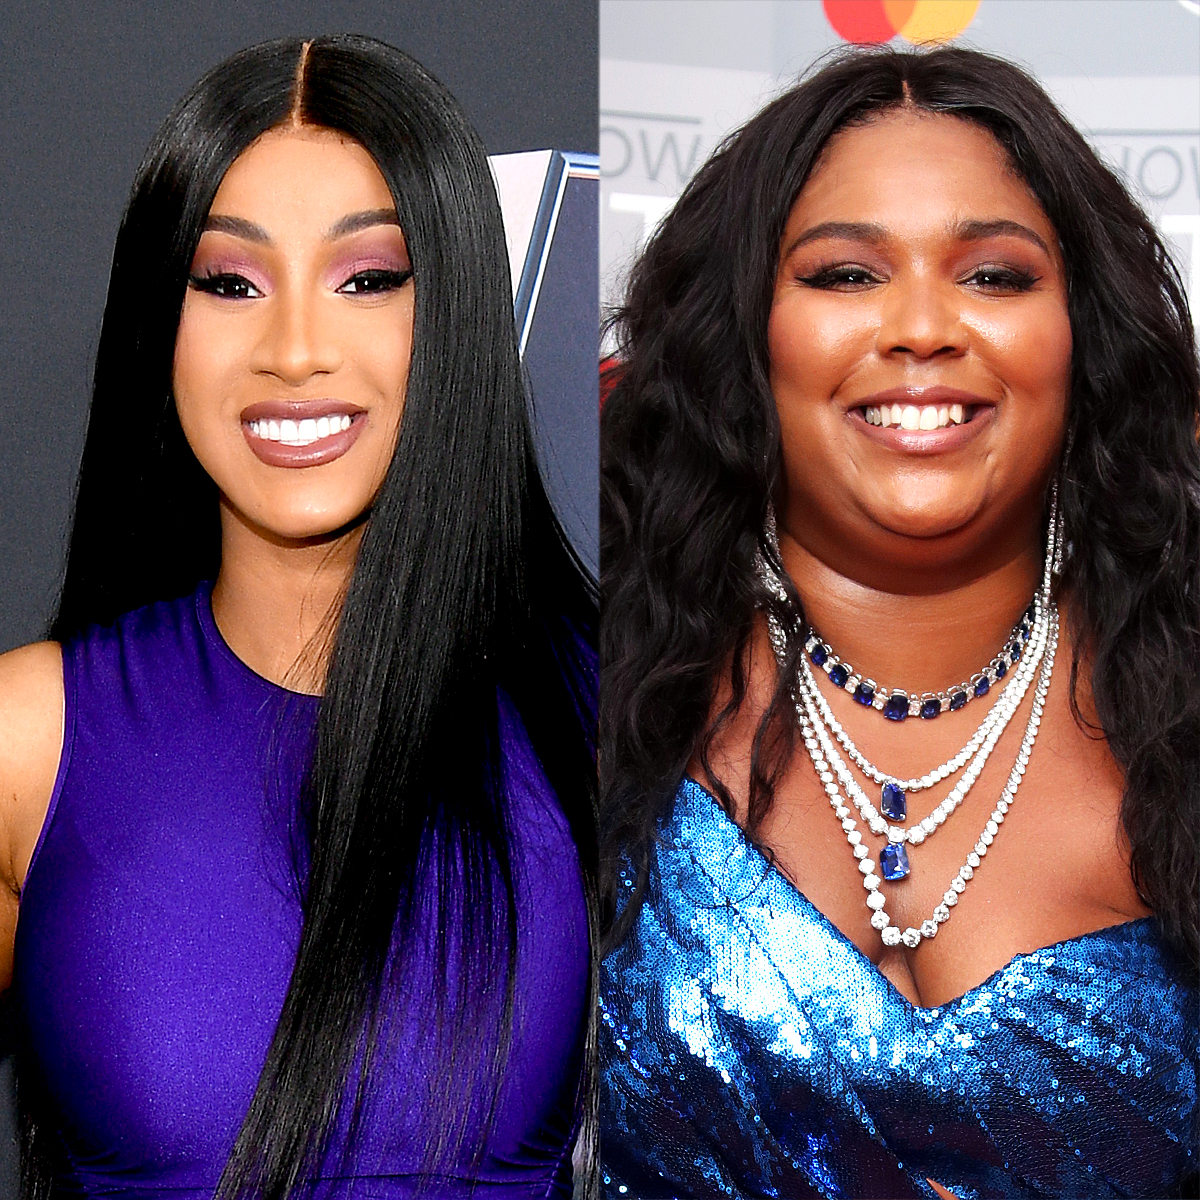 Lizzo Defended Her Rap Skills After Surpassing Cardi B's Chart